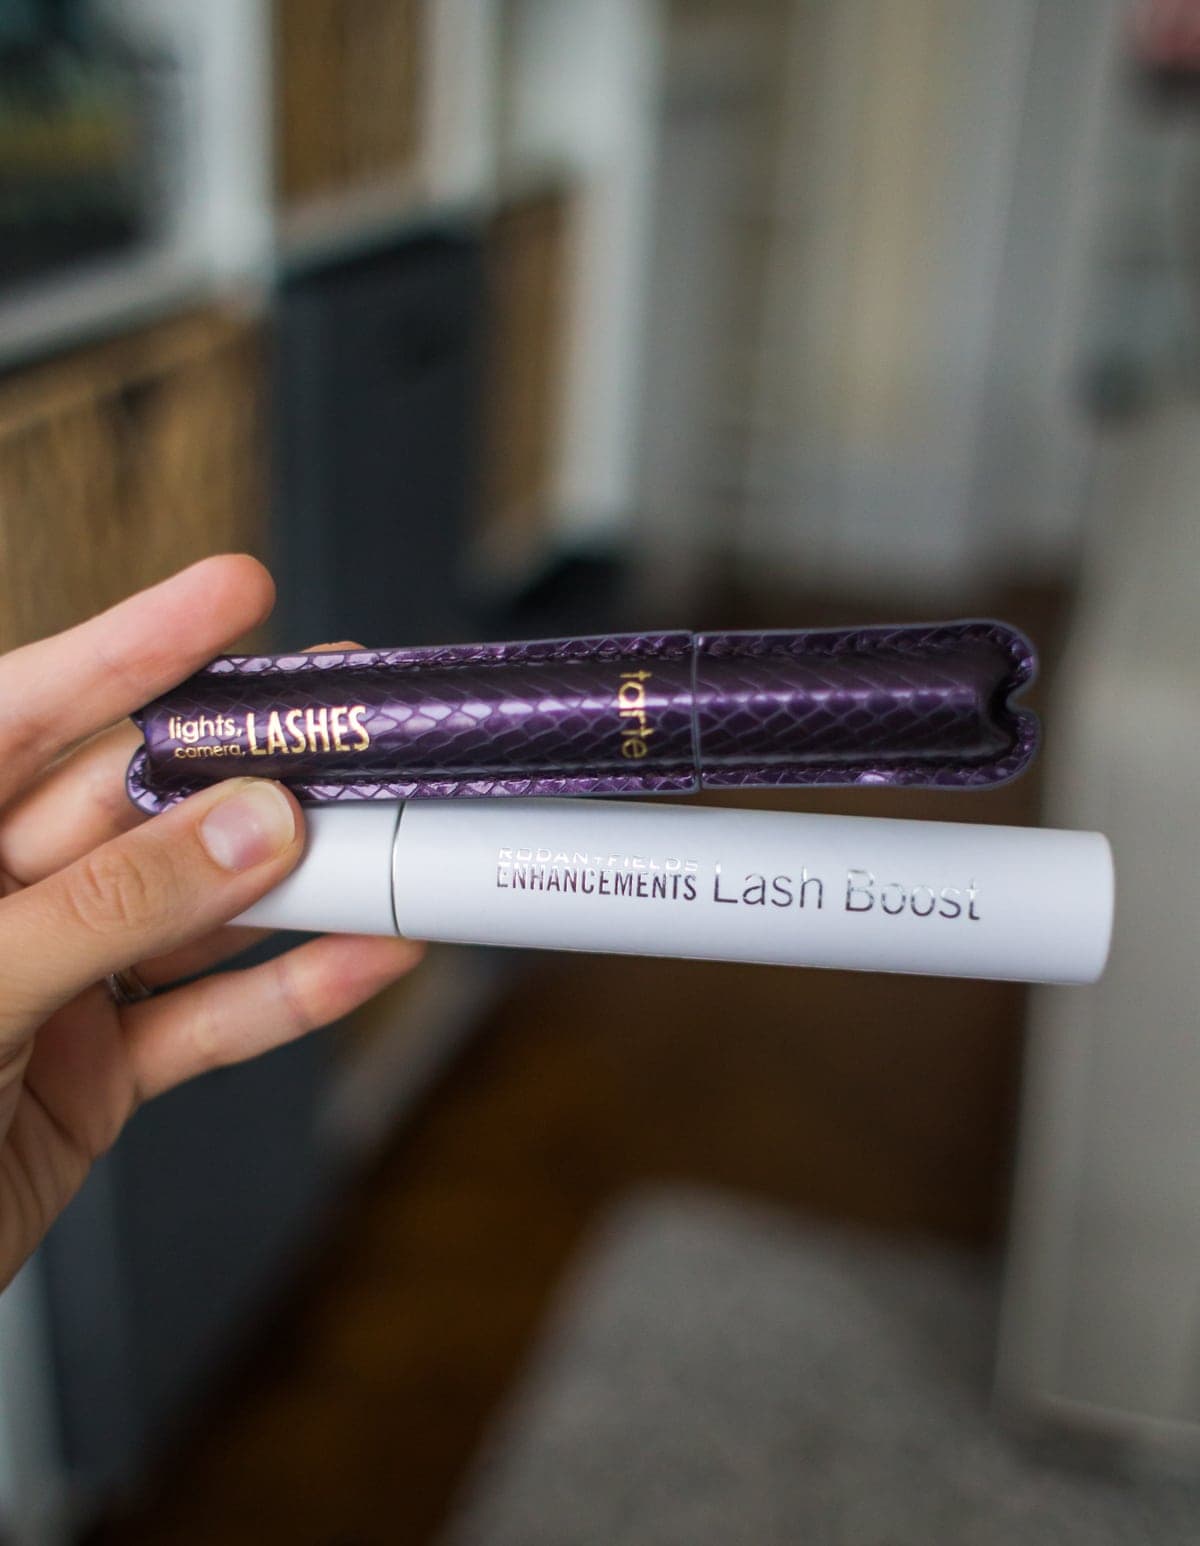 Two different mascaras